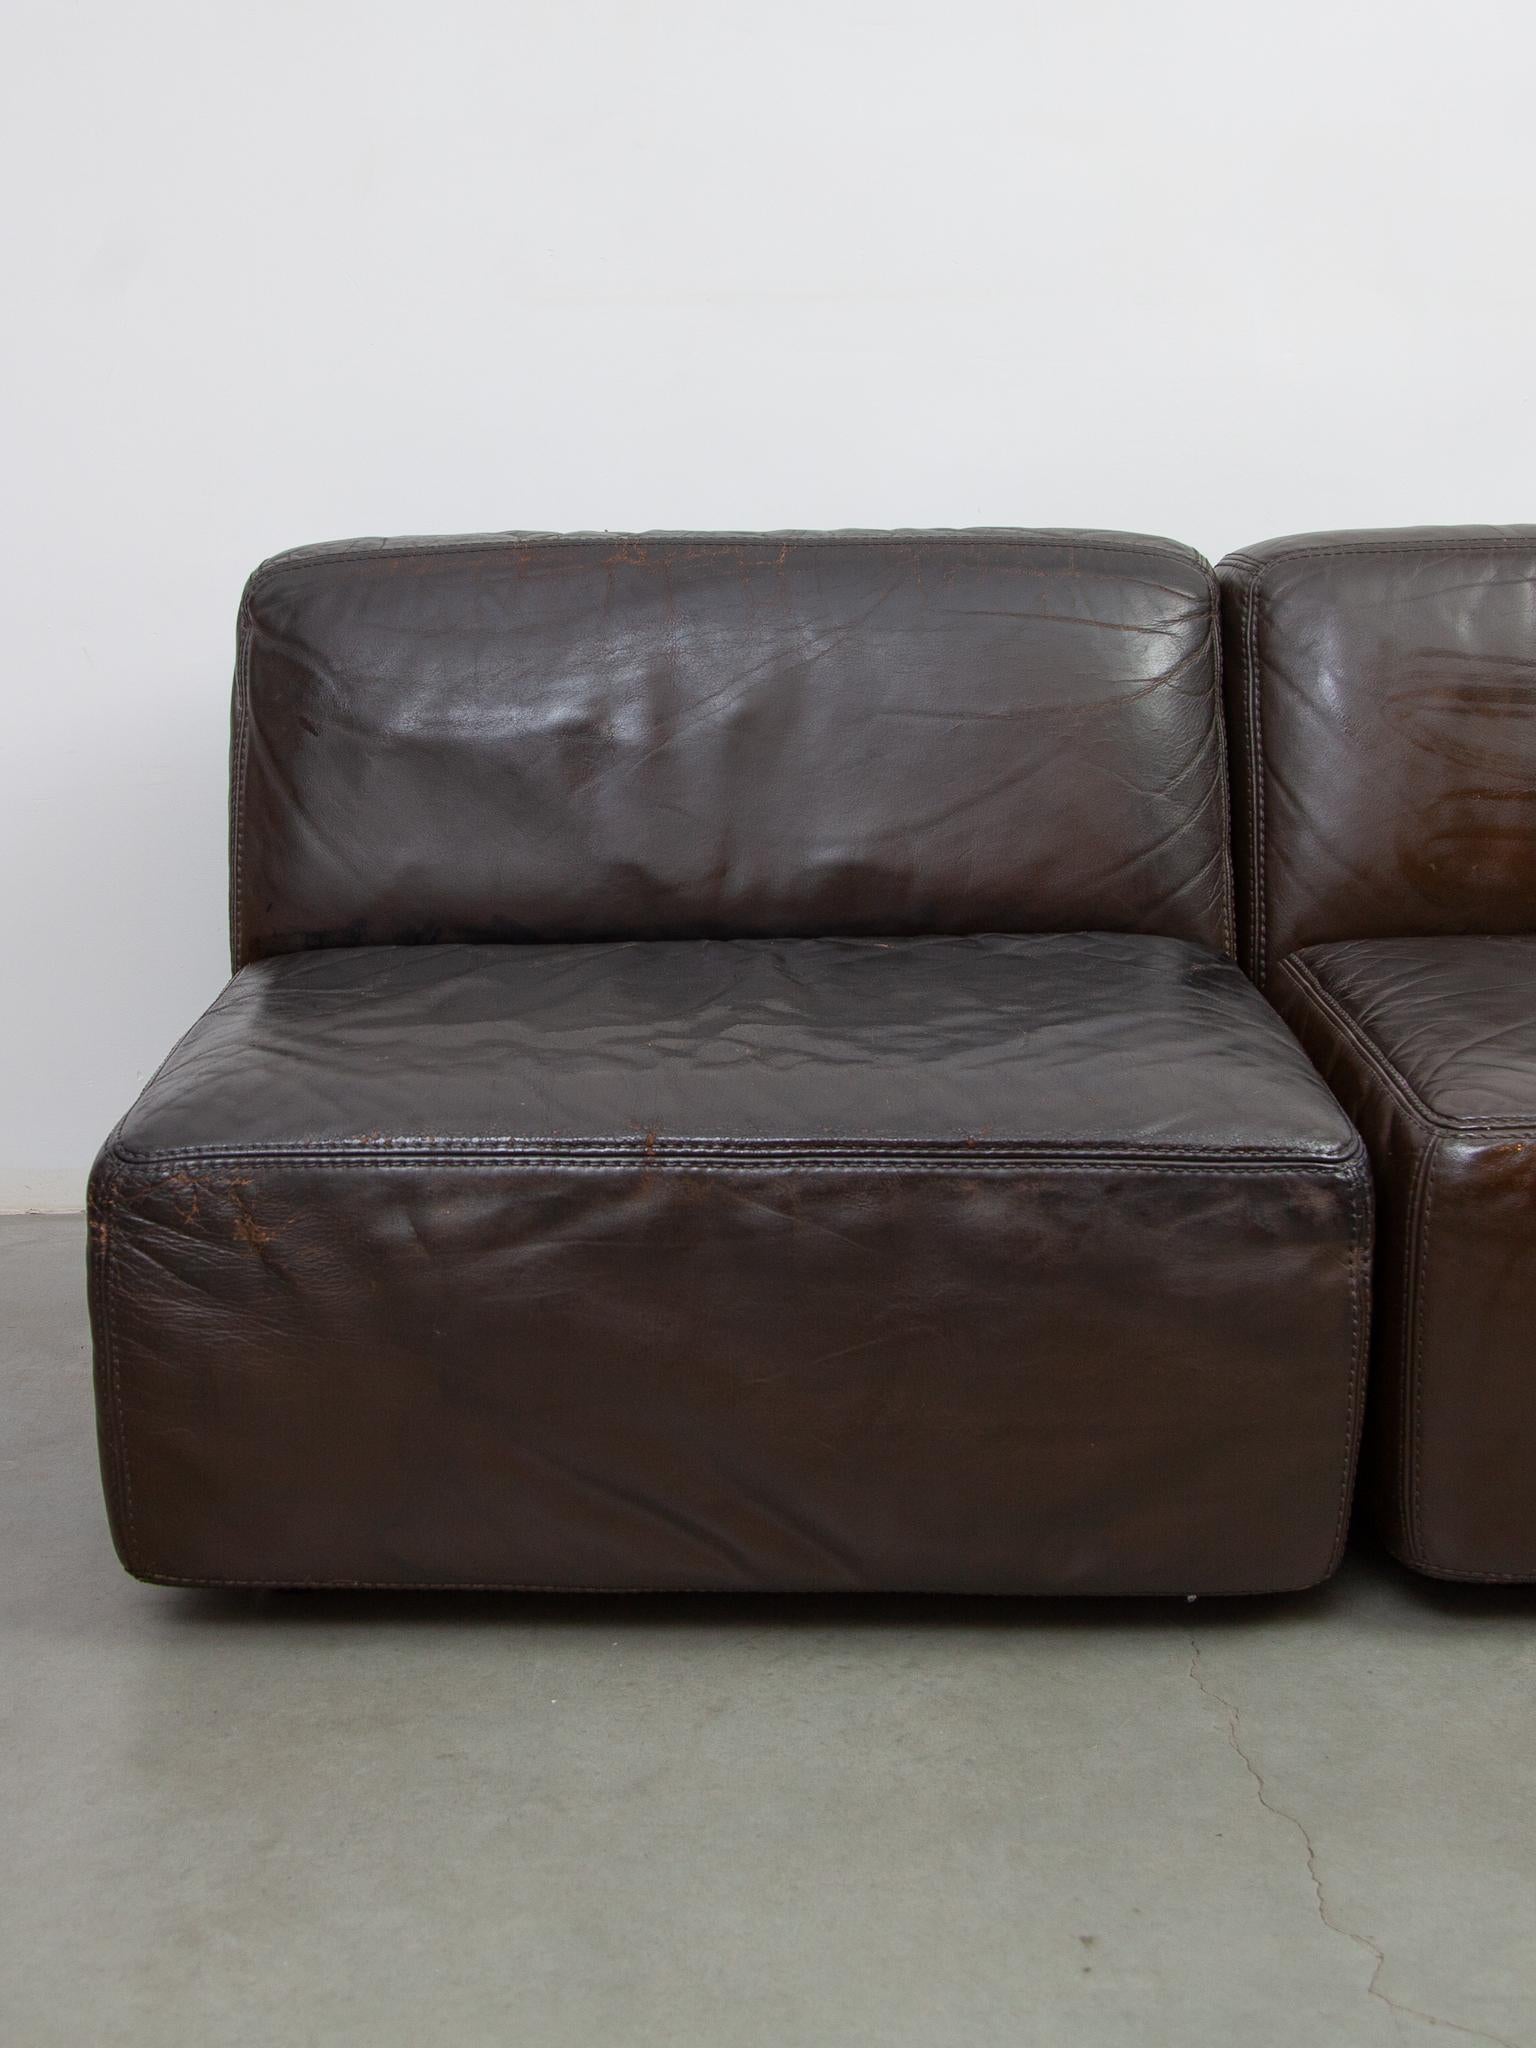 Mid-Century Modern Modular Sofa 1970s Brown Leather designed by Durlet For Sale